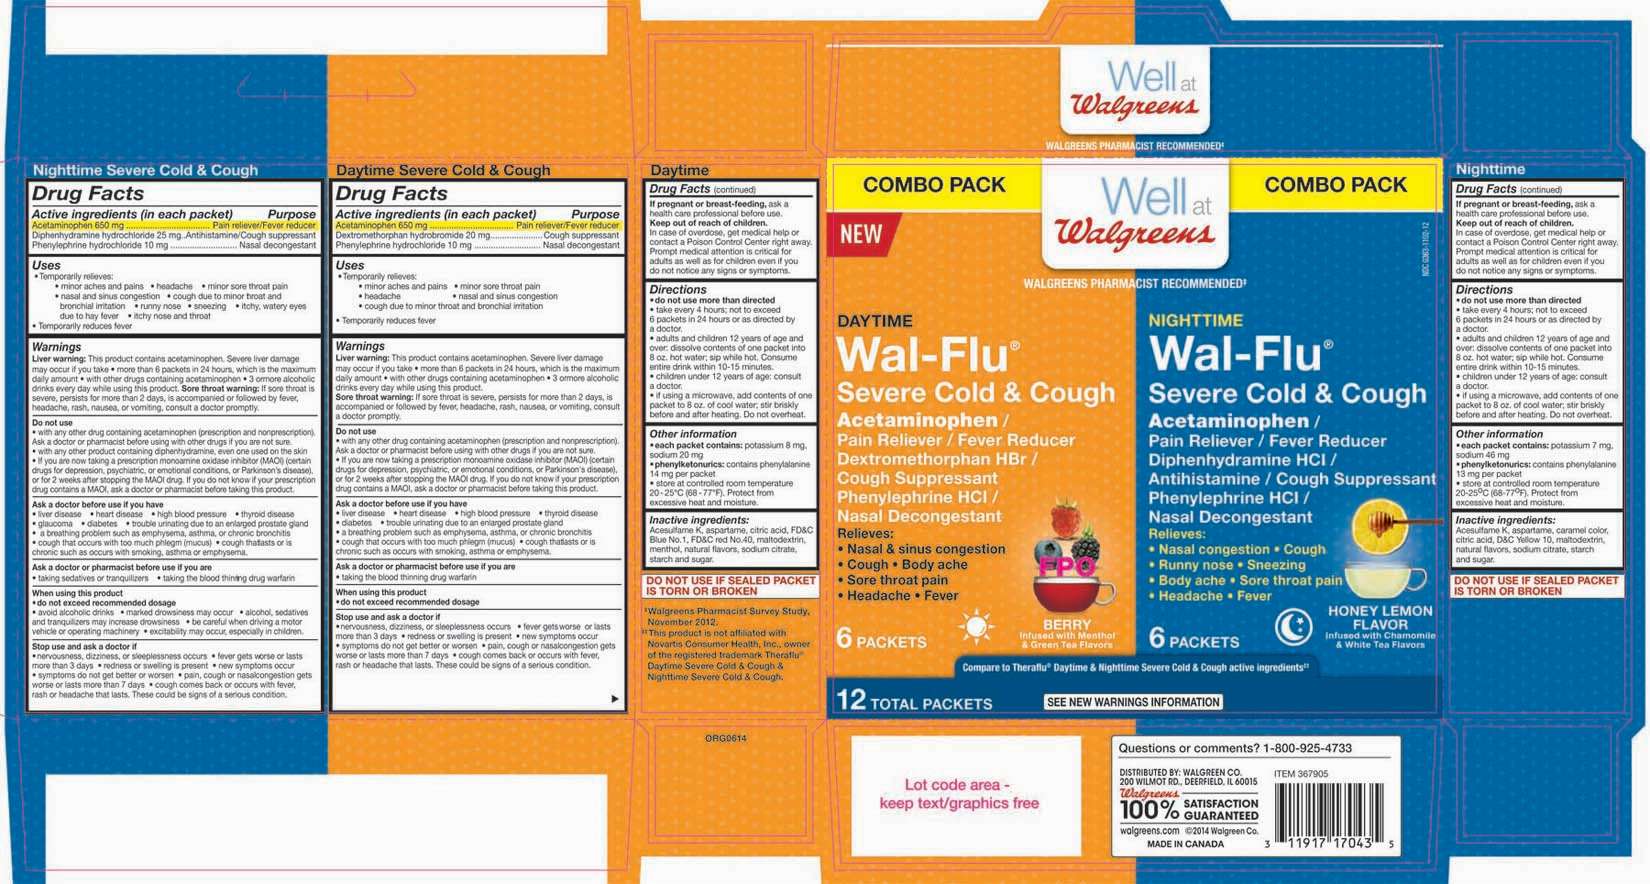 Walgreens Daytime Nighttime Wal-Flu Severe Cold and Cough Kit